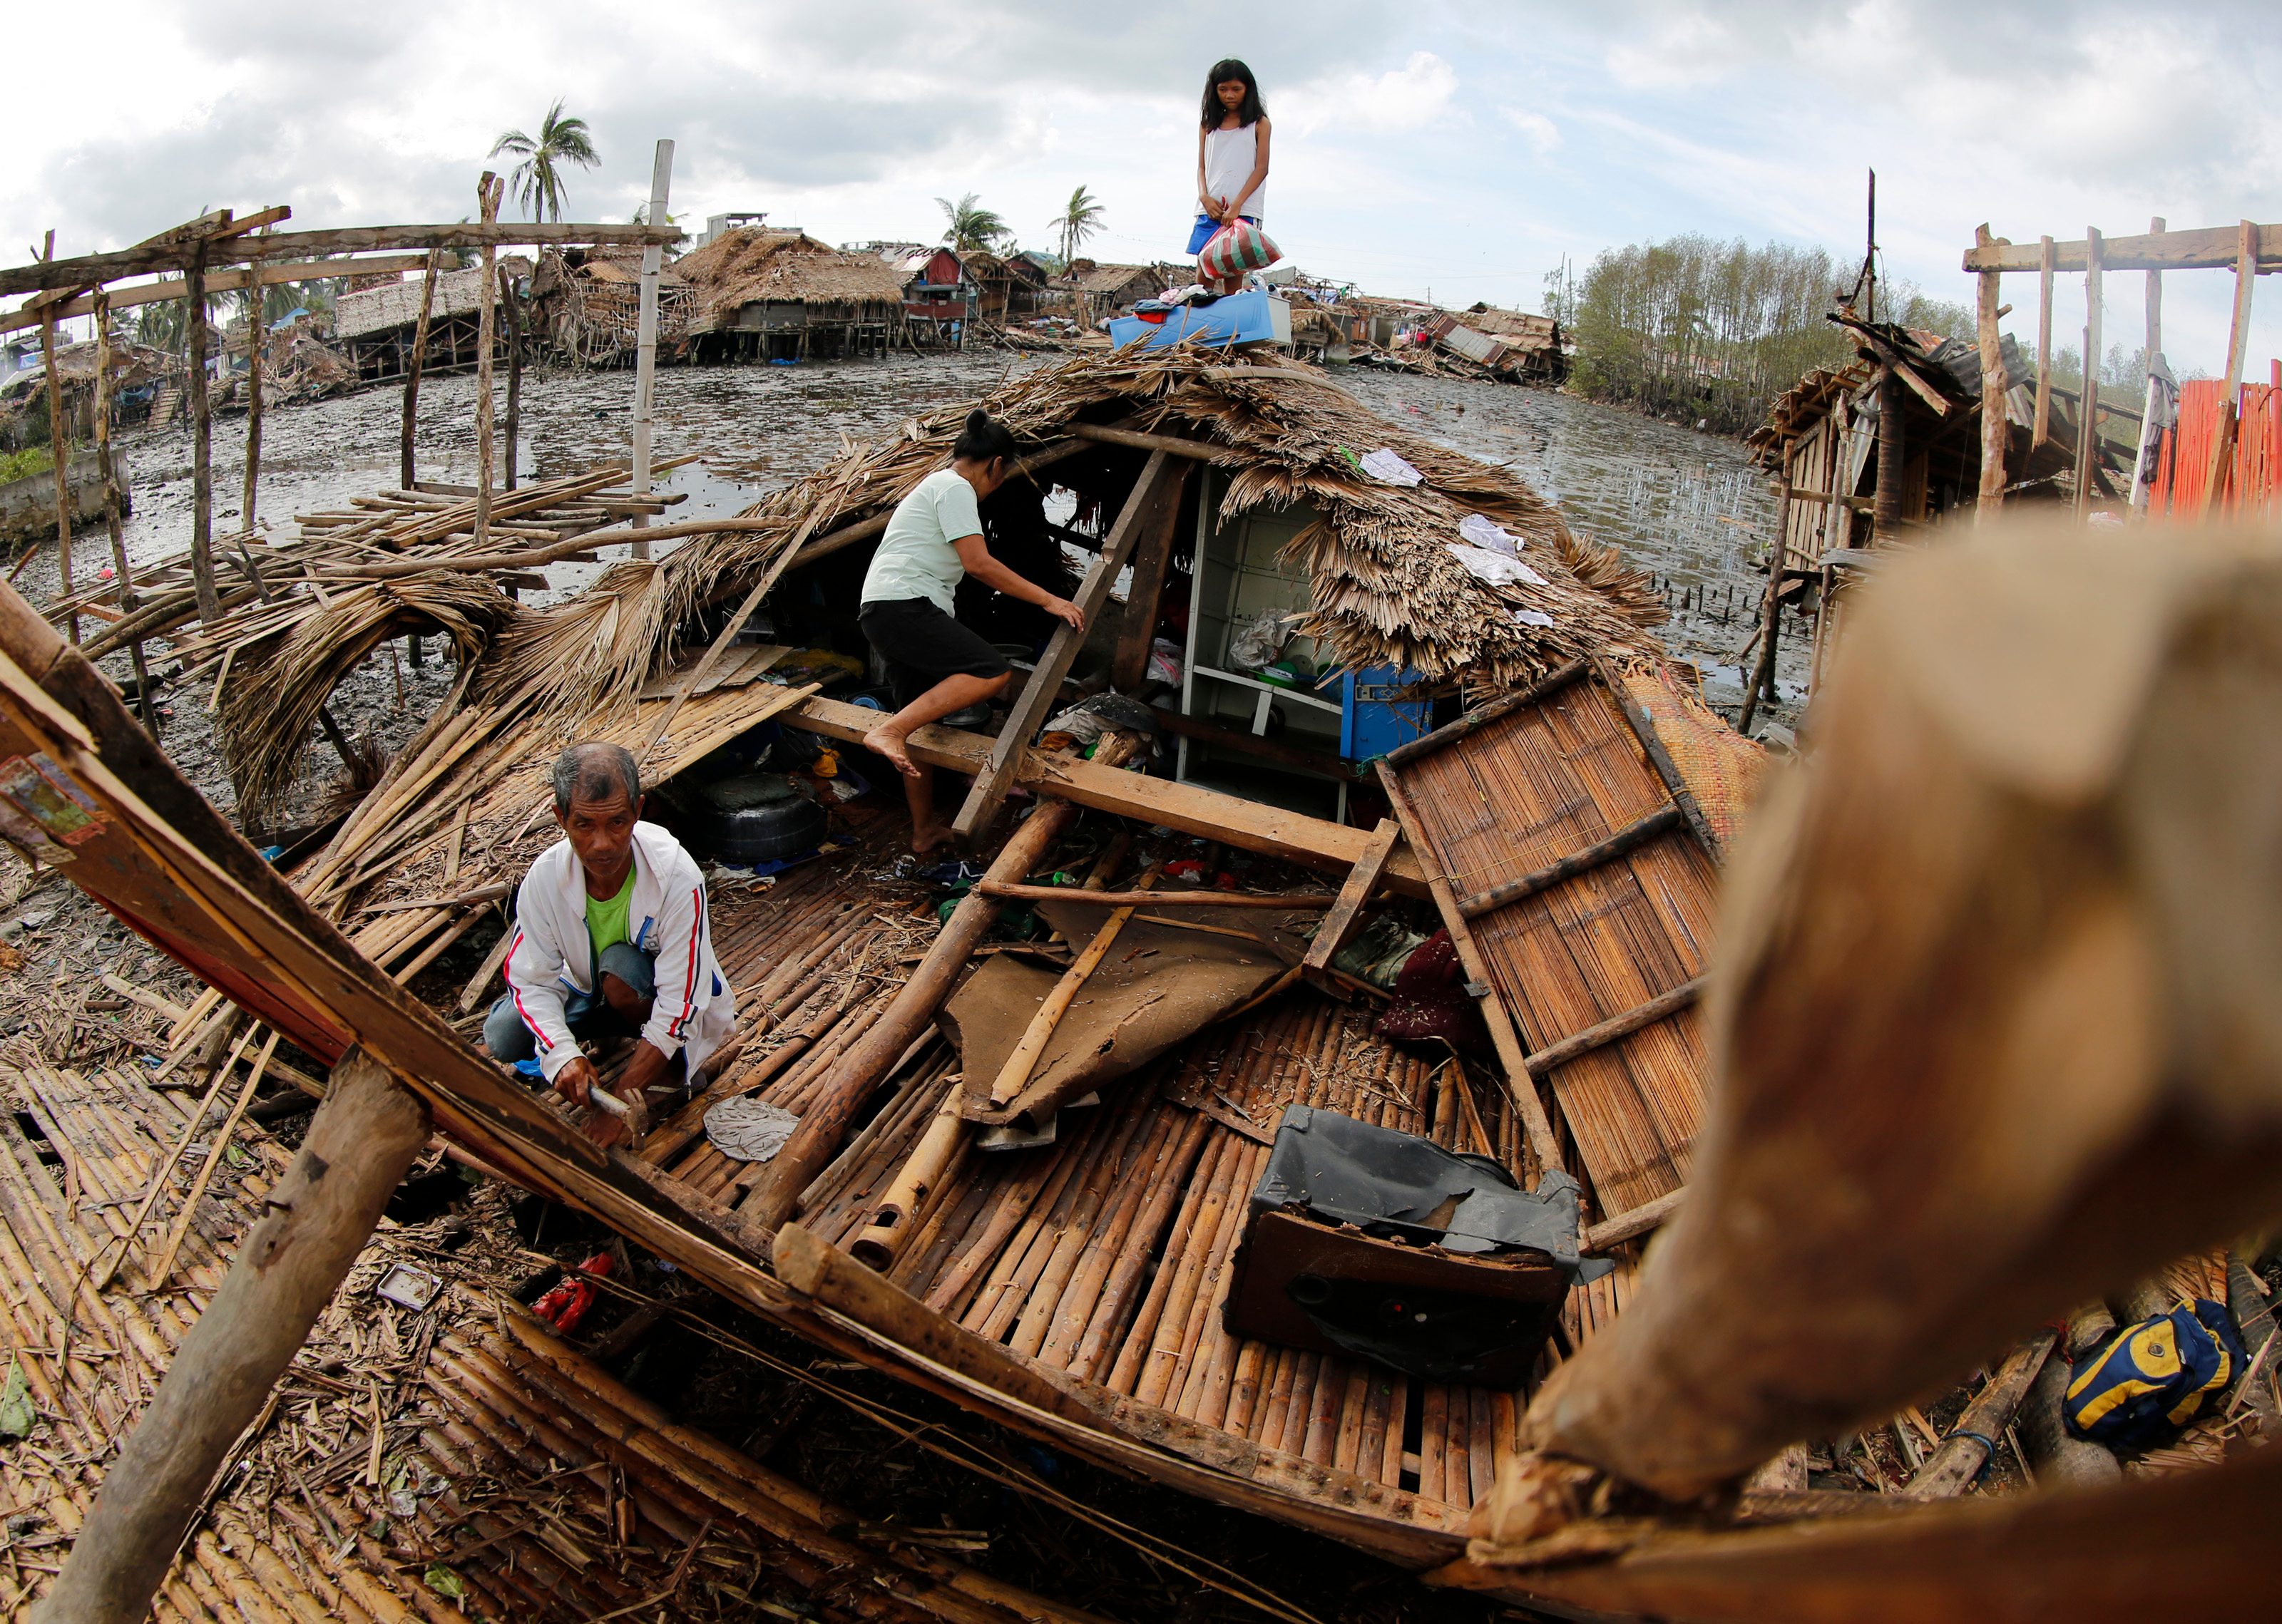 DAMAGED. Filipino villagers rebuild a damaged house in the typhoon-hit town of Magallanes, Sorsogon province, southern Manila, Philippines, on December 16, 2015. File photo by Francis R. Malasig/EPA  